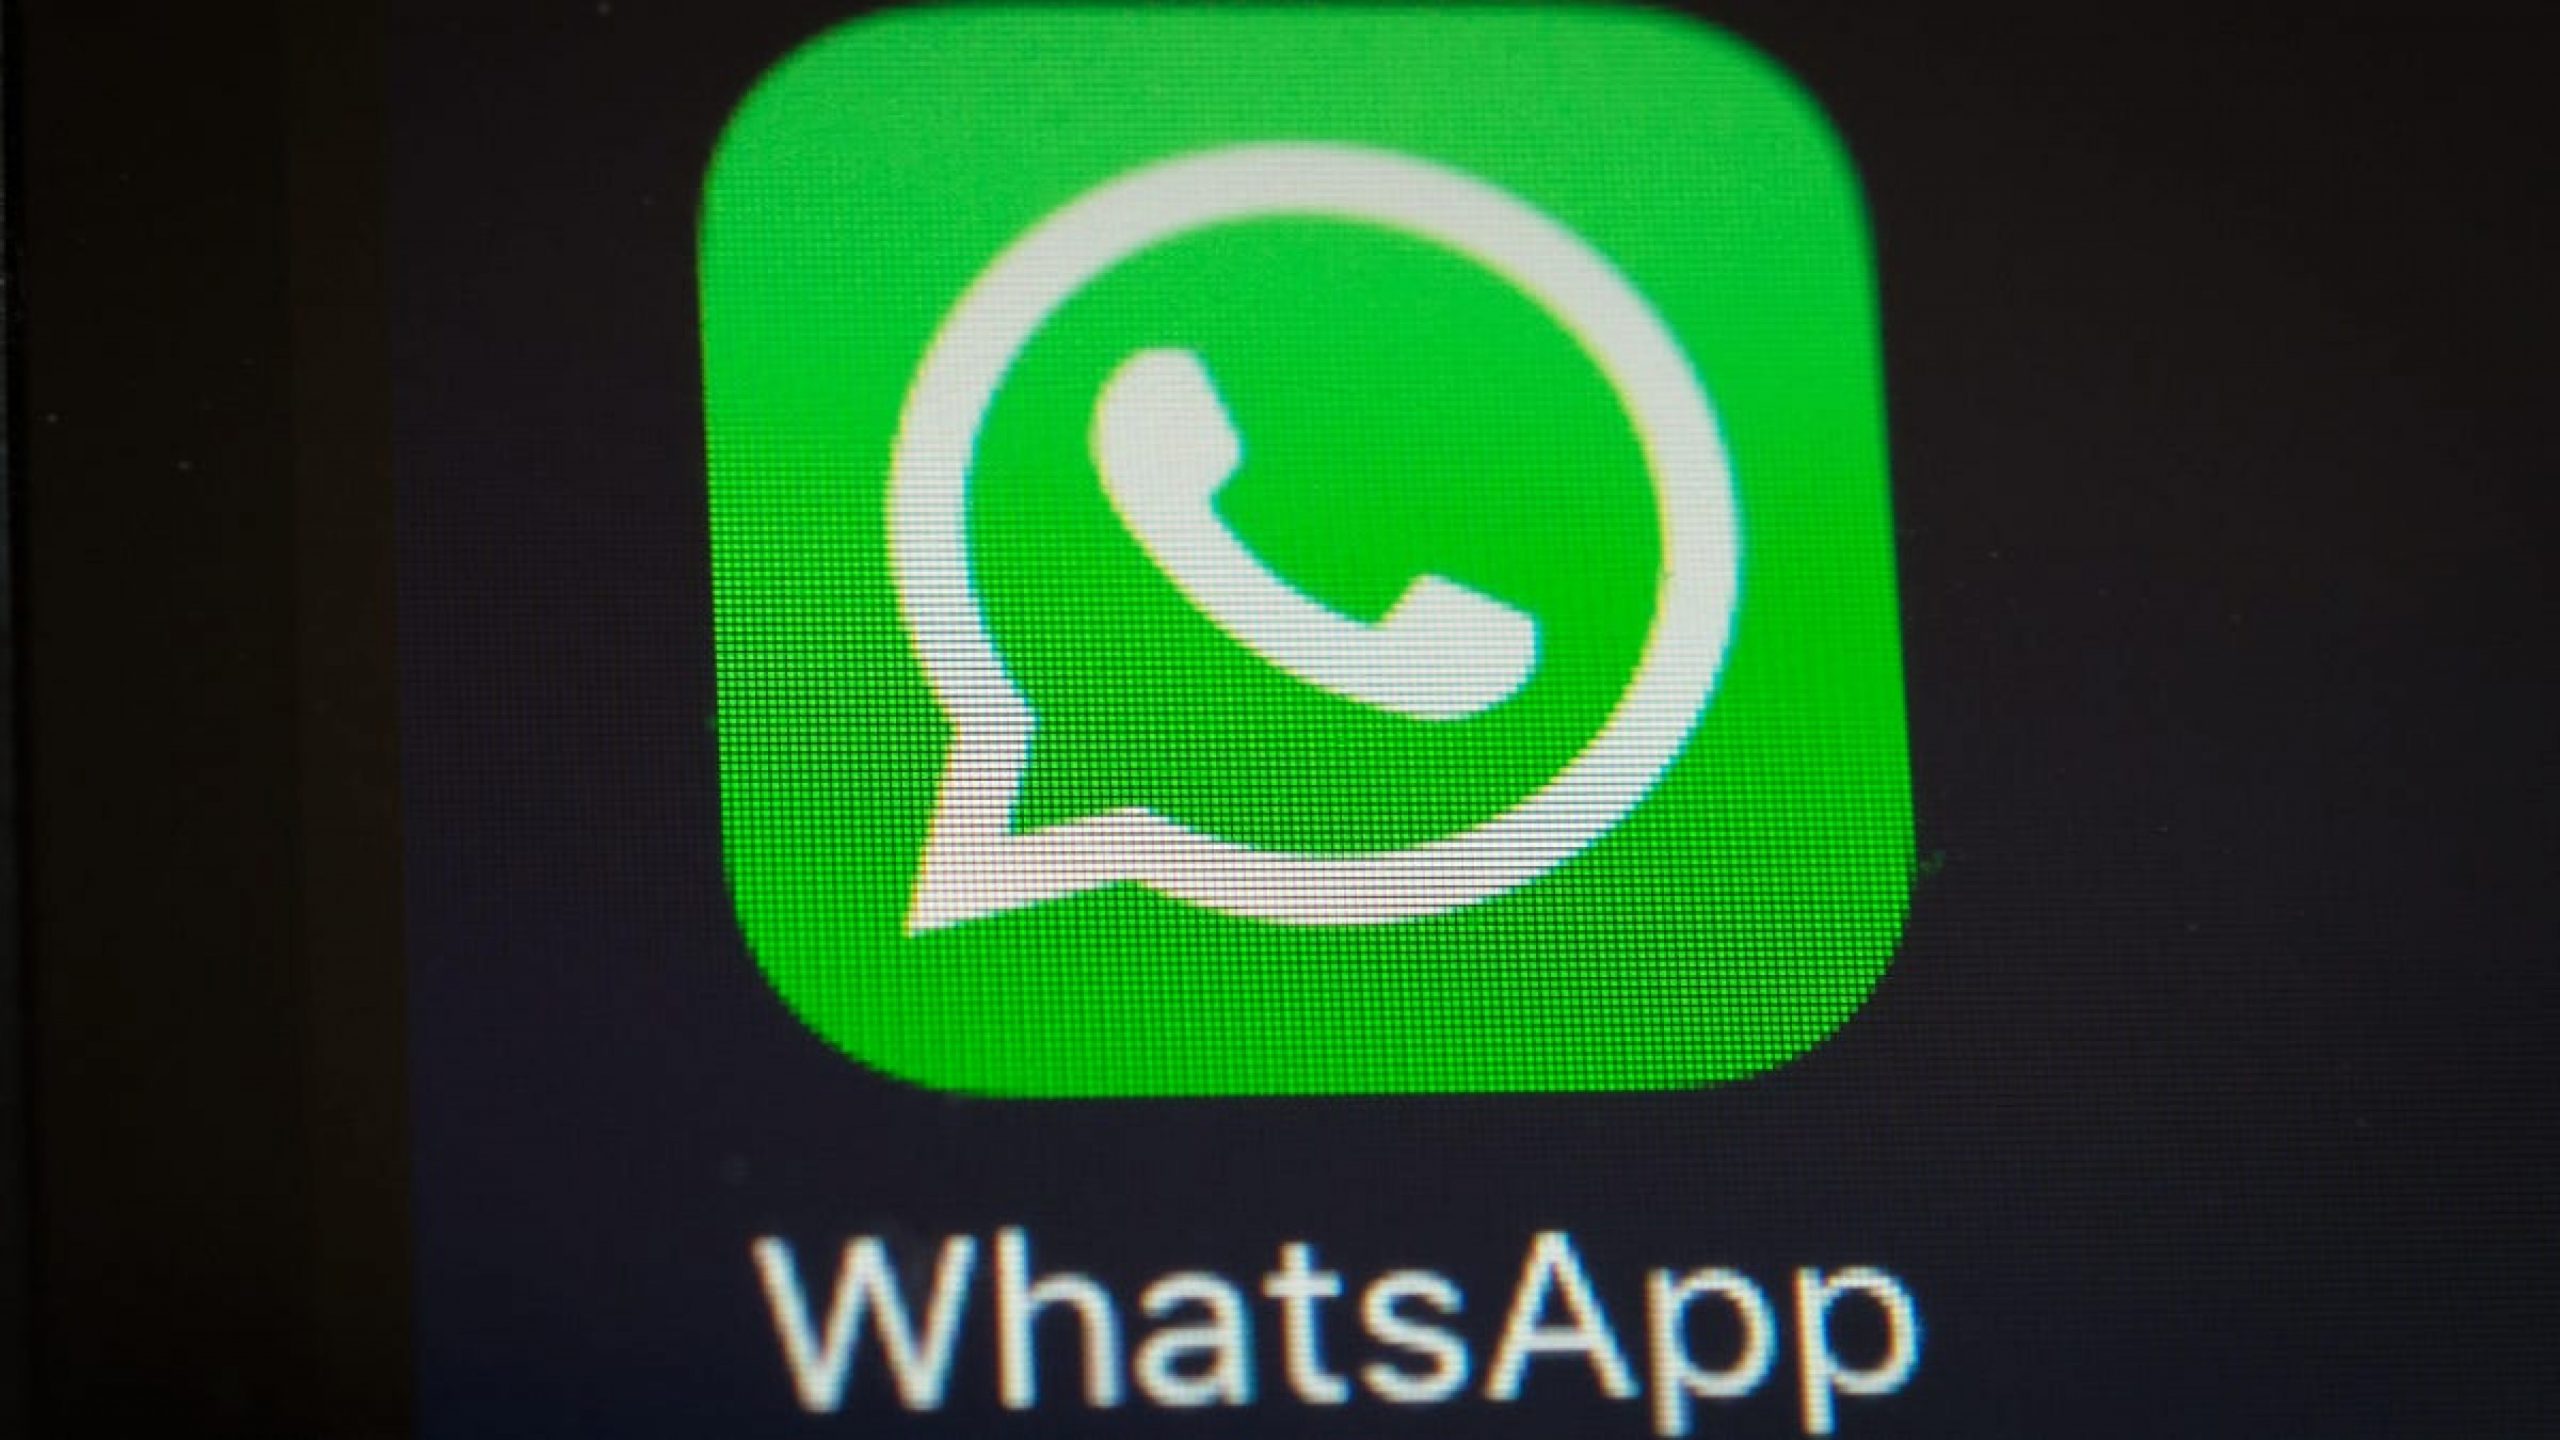 WhatsApp Is Working on Offering Disappearing Photo and Video Messages on iOS and Android